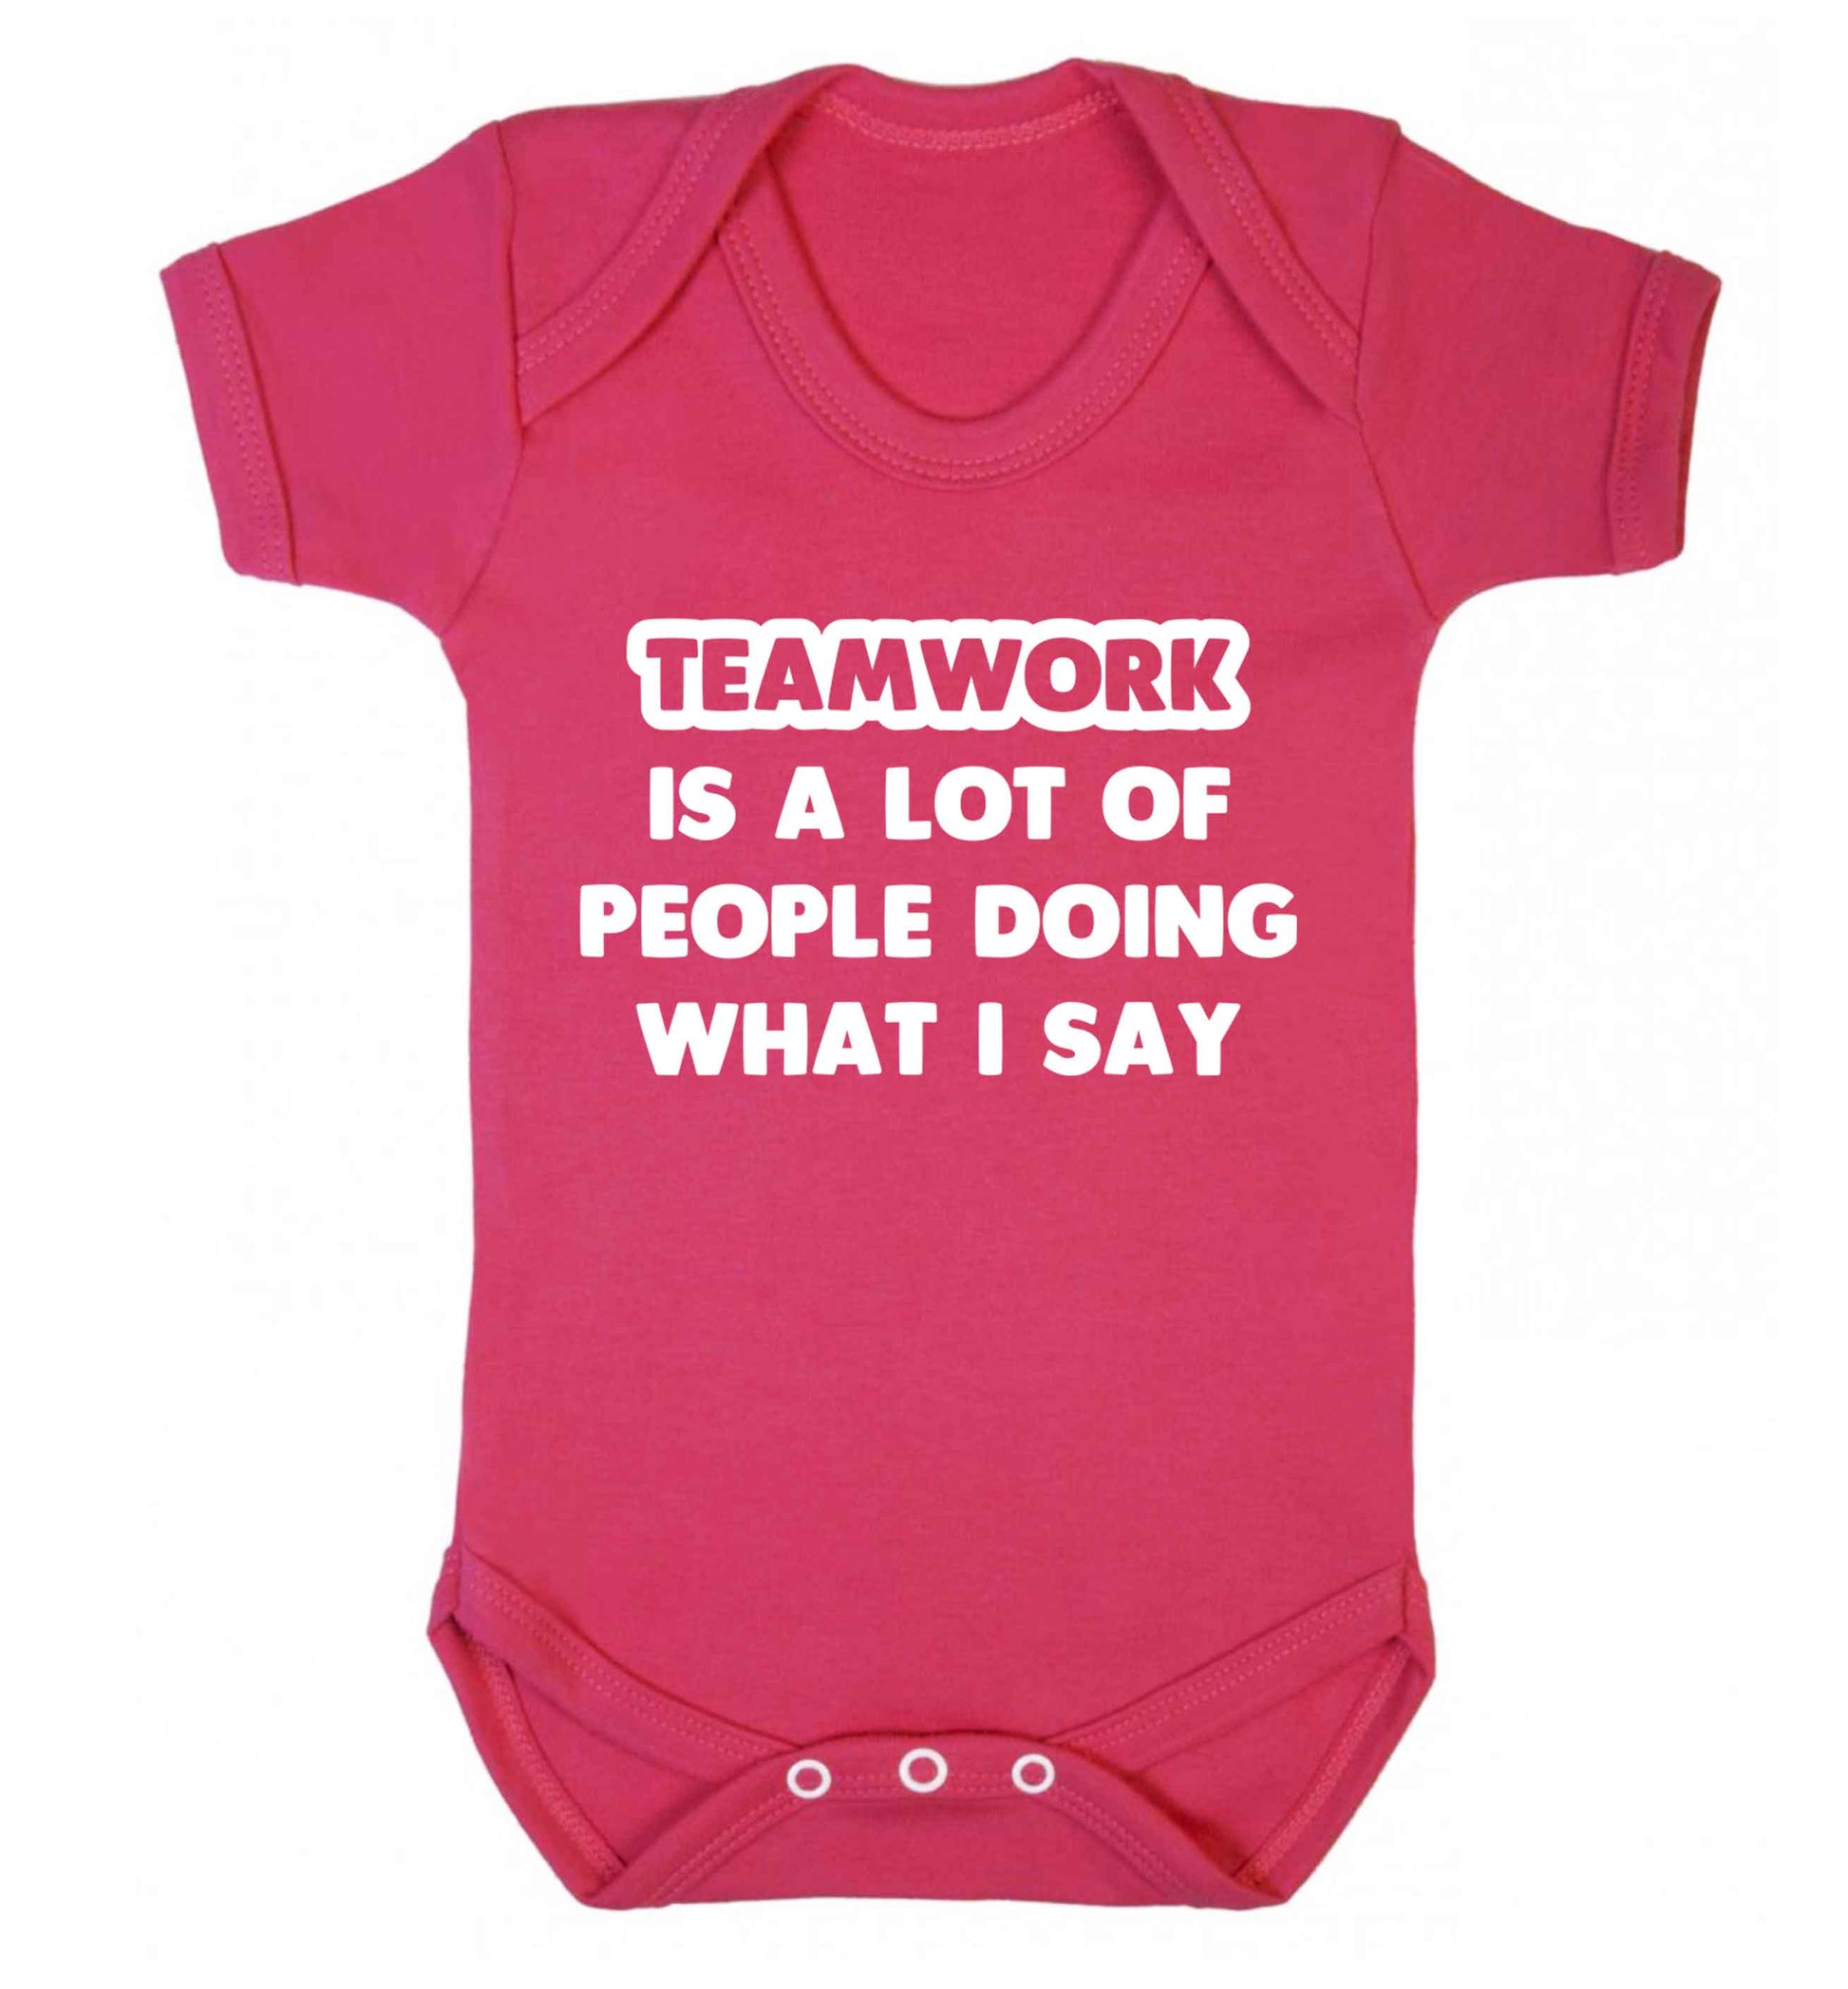 Teamwork is a lot of people doing what I say Baby Vest dark pink 18-24 months